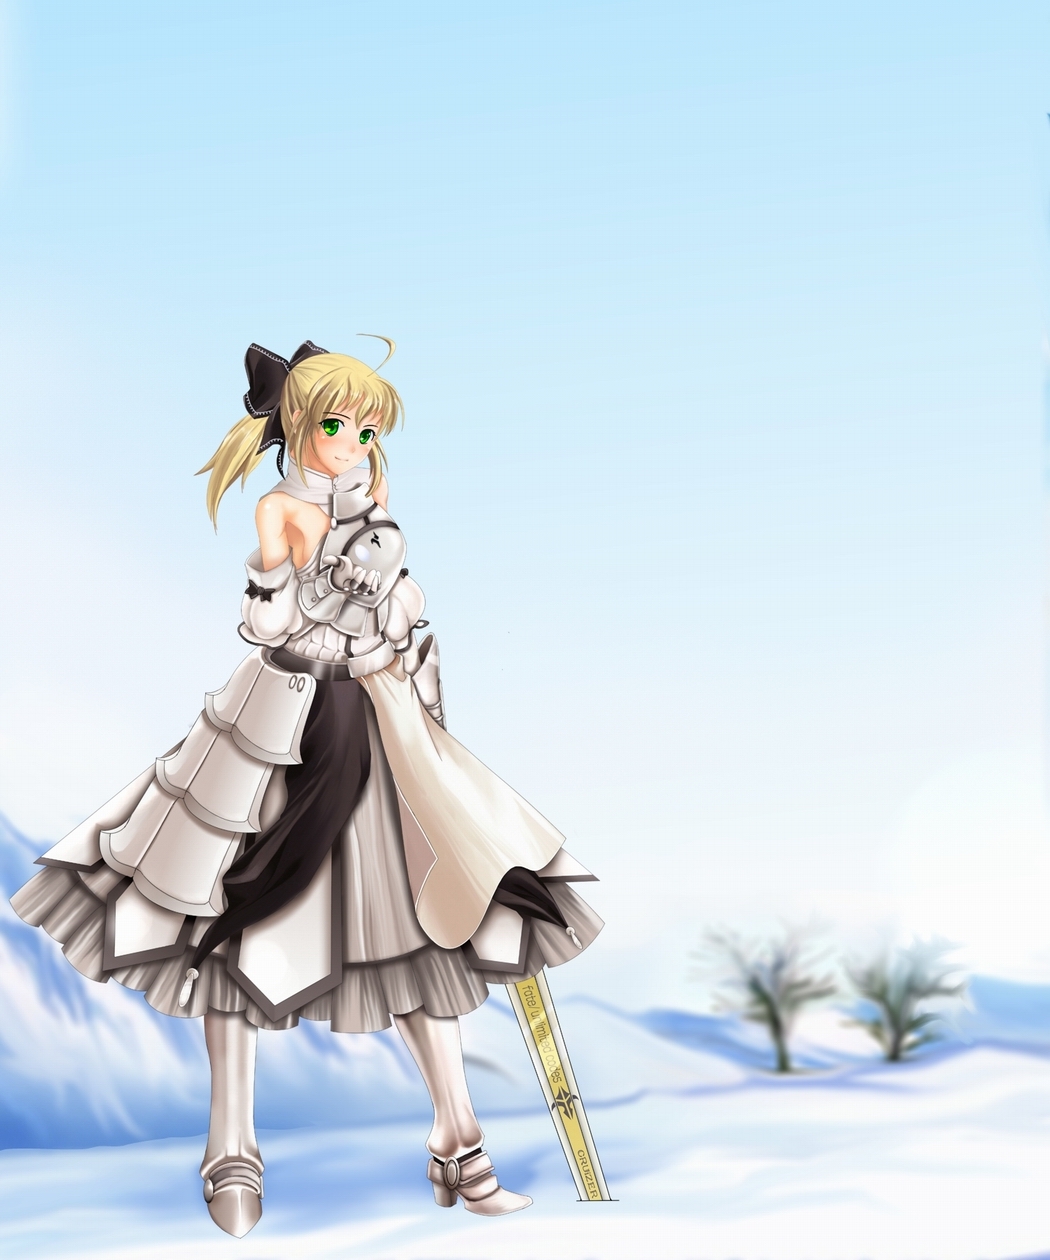 Saber Lily~ - Anime Girl Knight Winter - HD Wallpaper 